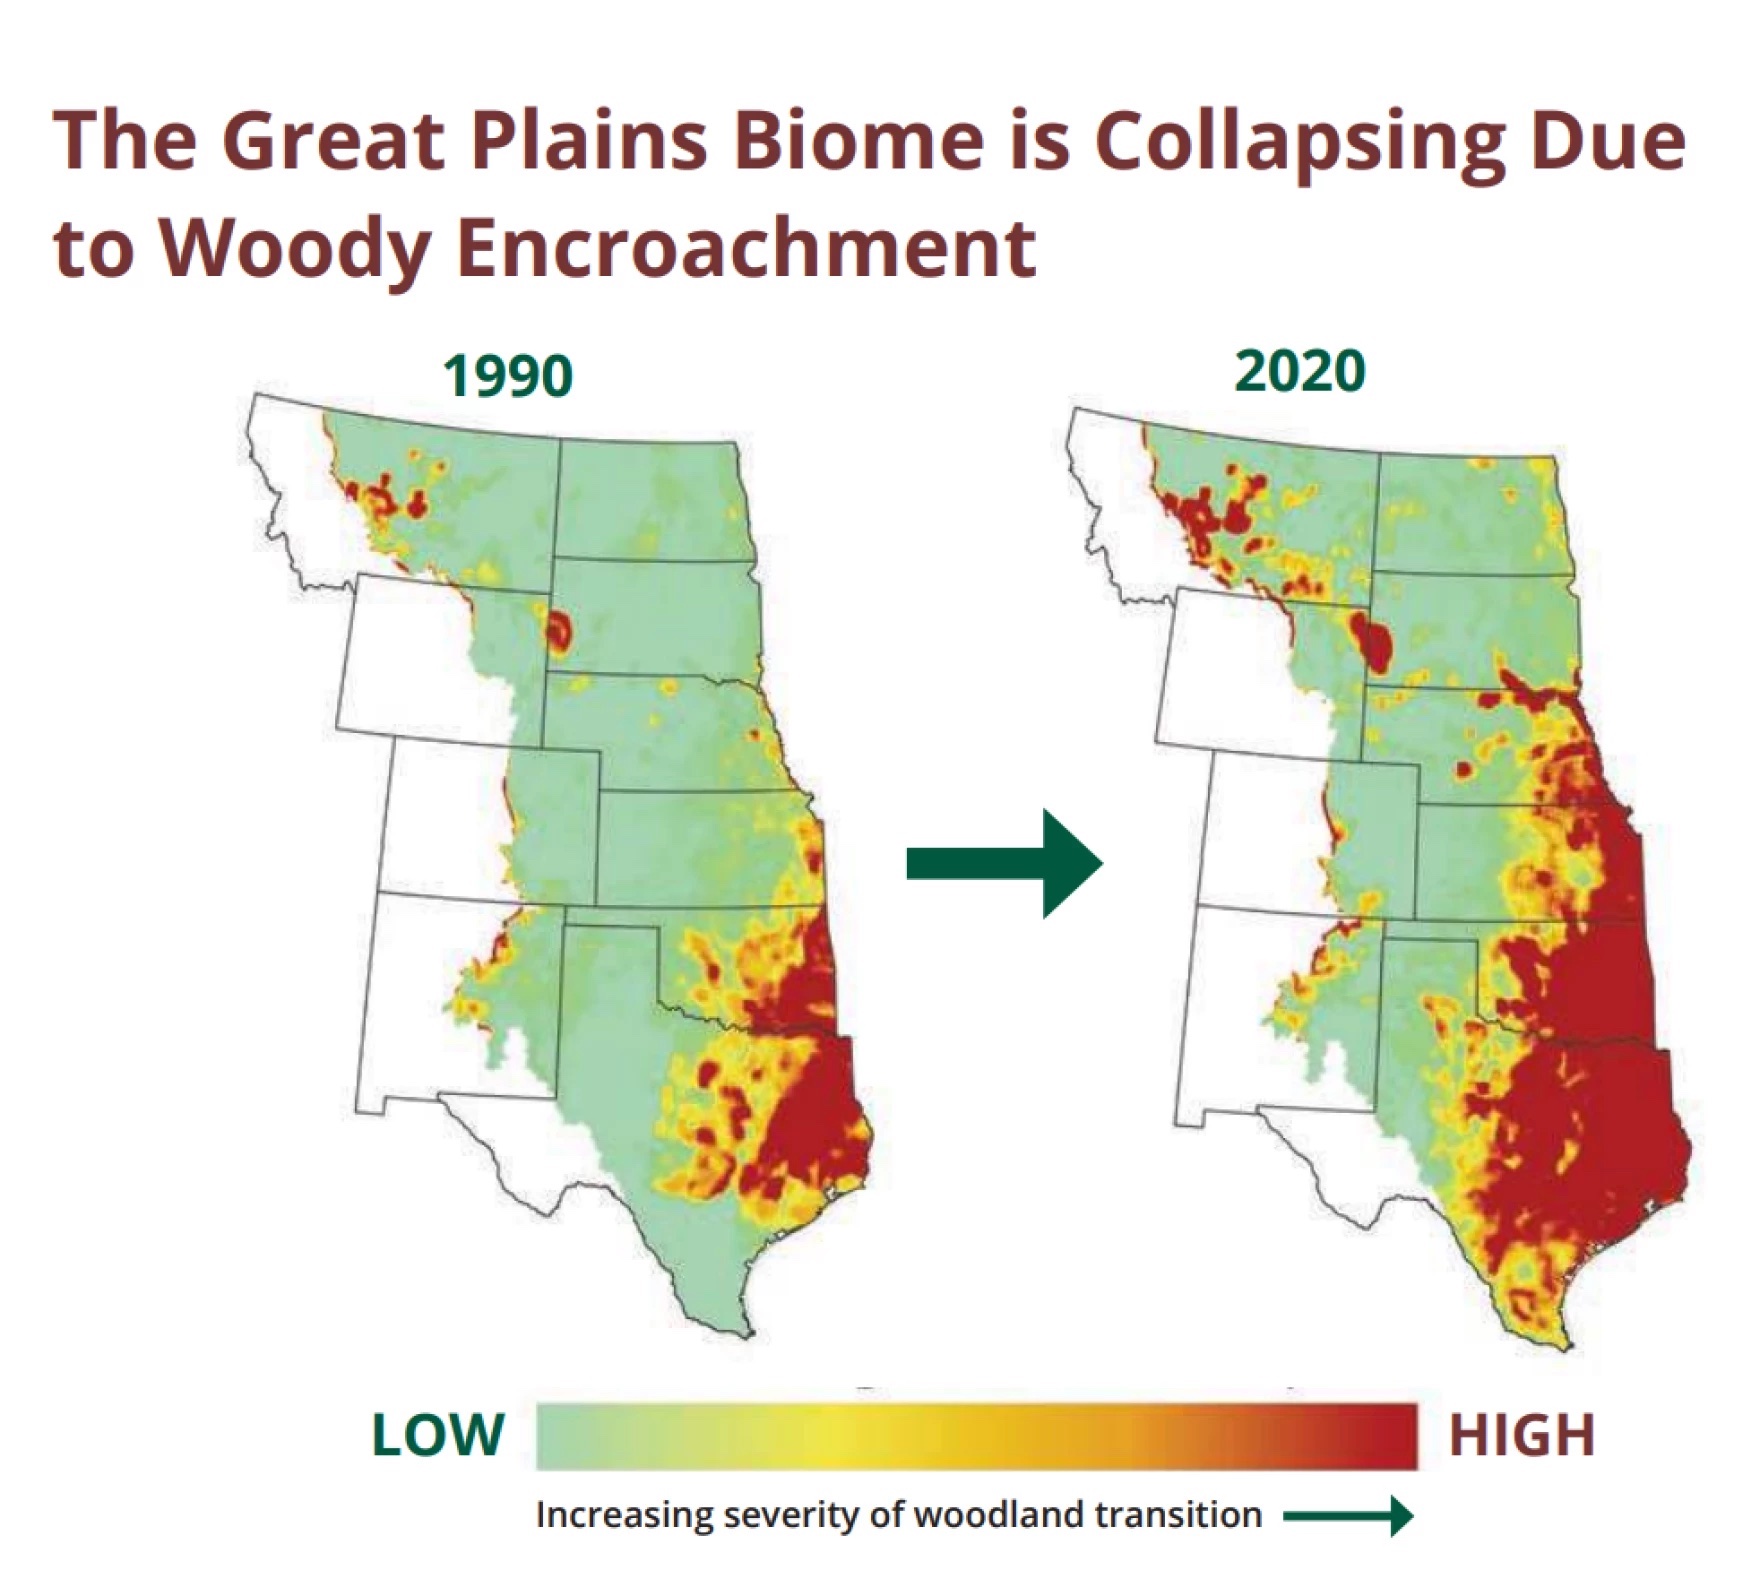 From 1990 to 2020, the Great Plains region became more covered in woodlands.